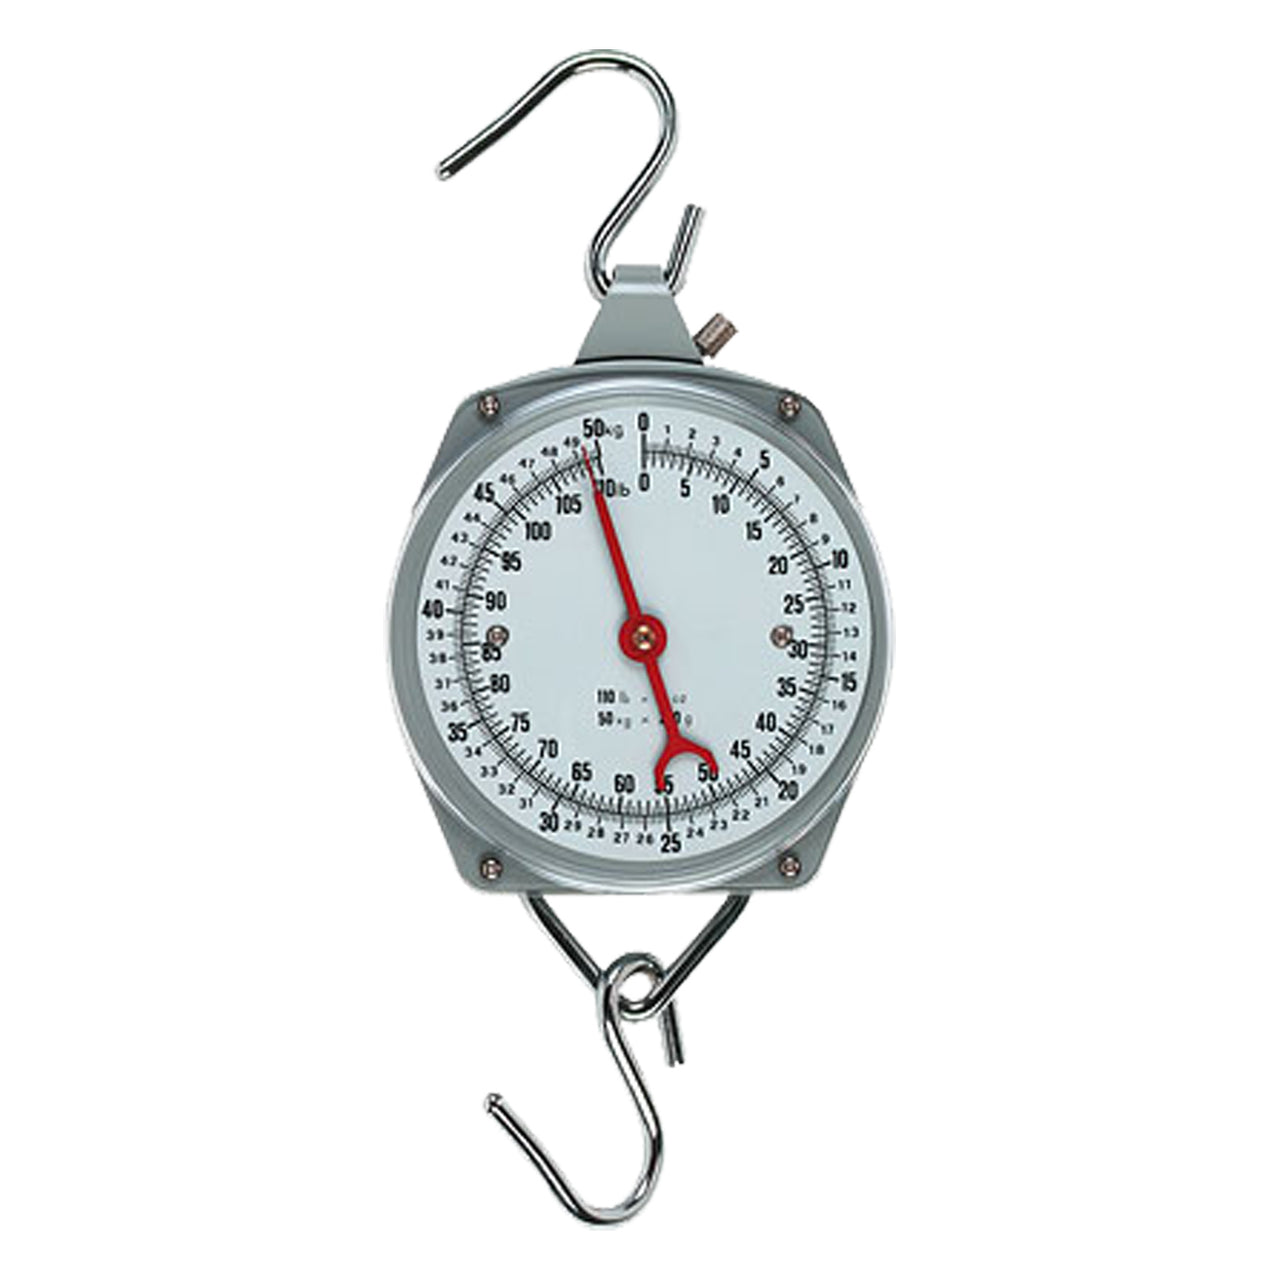 Kerbl Suspended Dial Balance 50 Kg - Weigh Slings Scales Kerbl - Canada